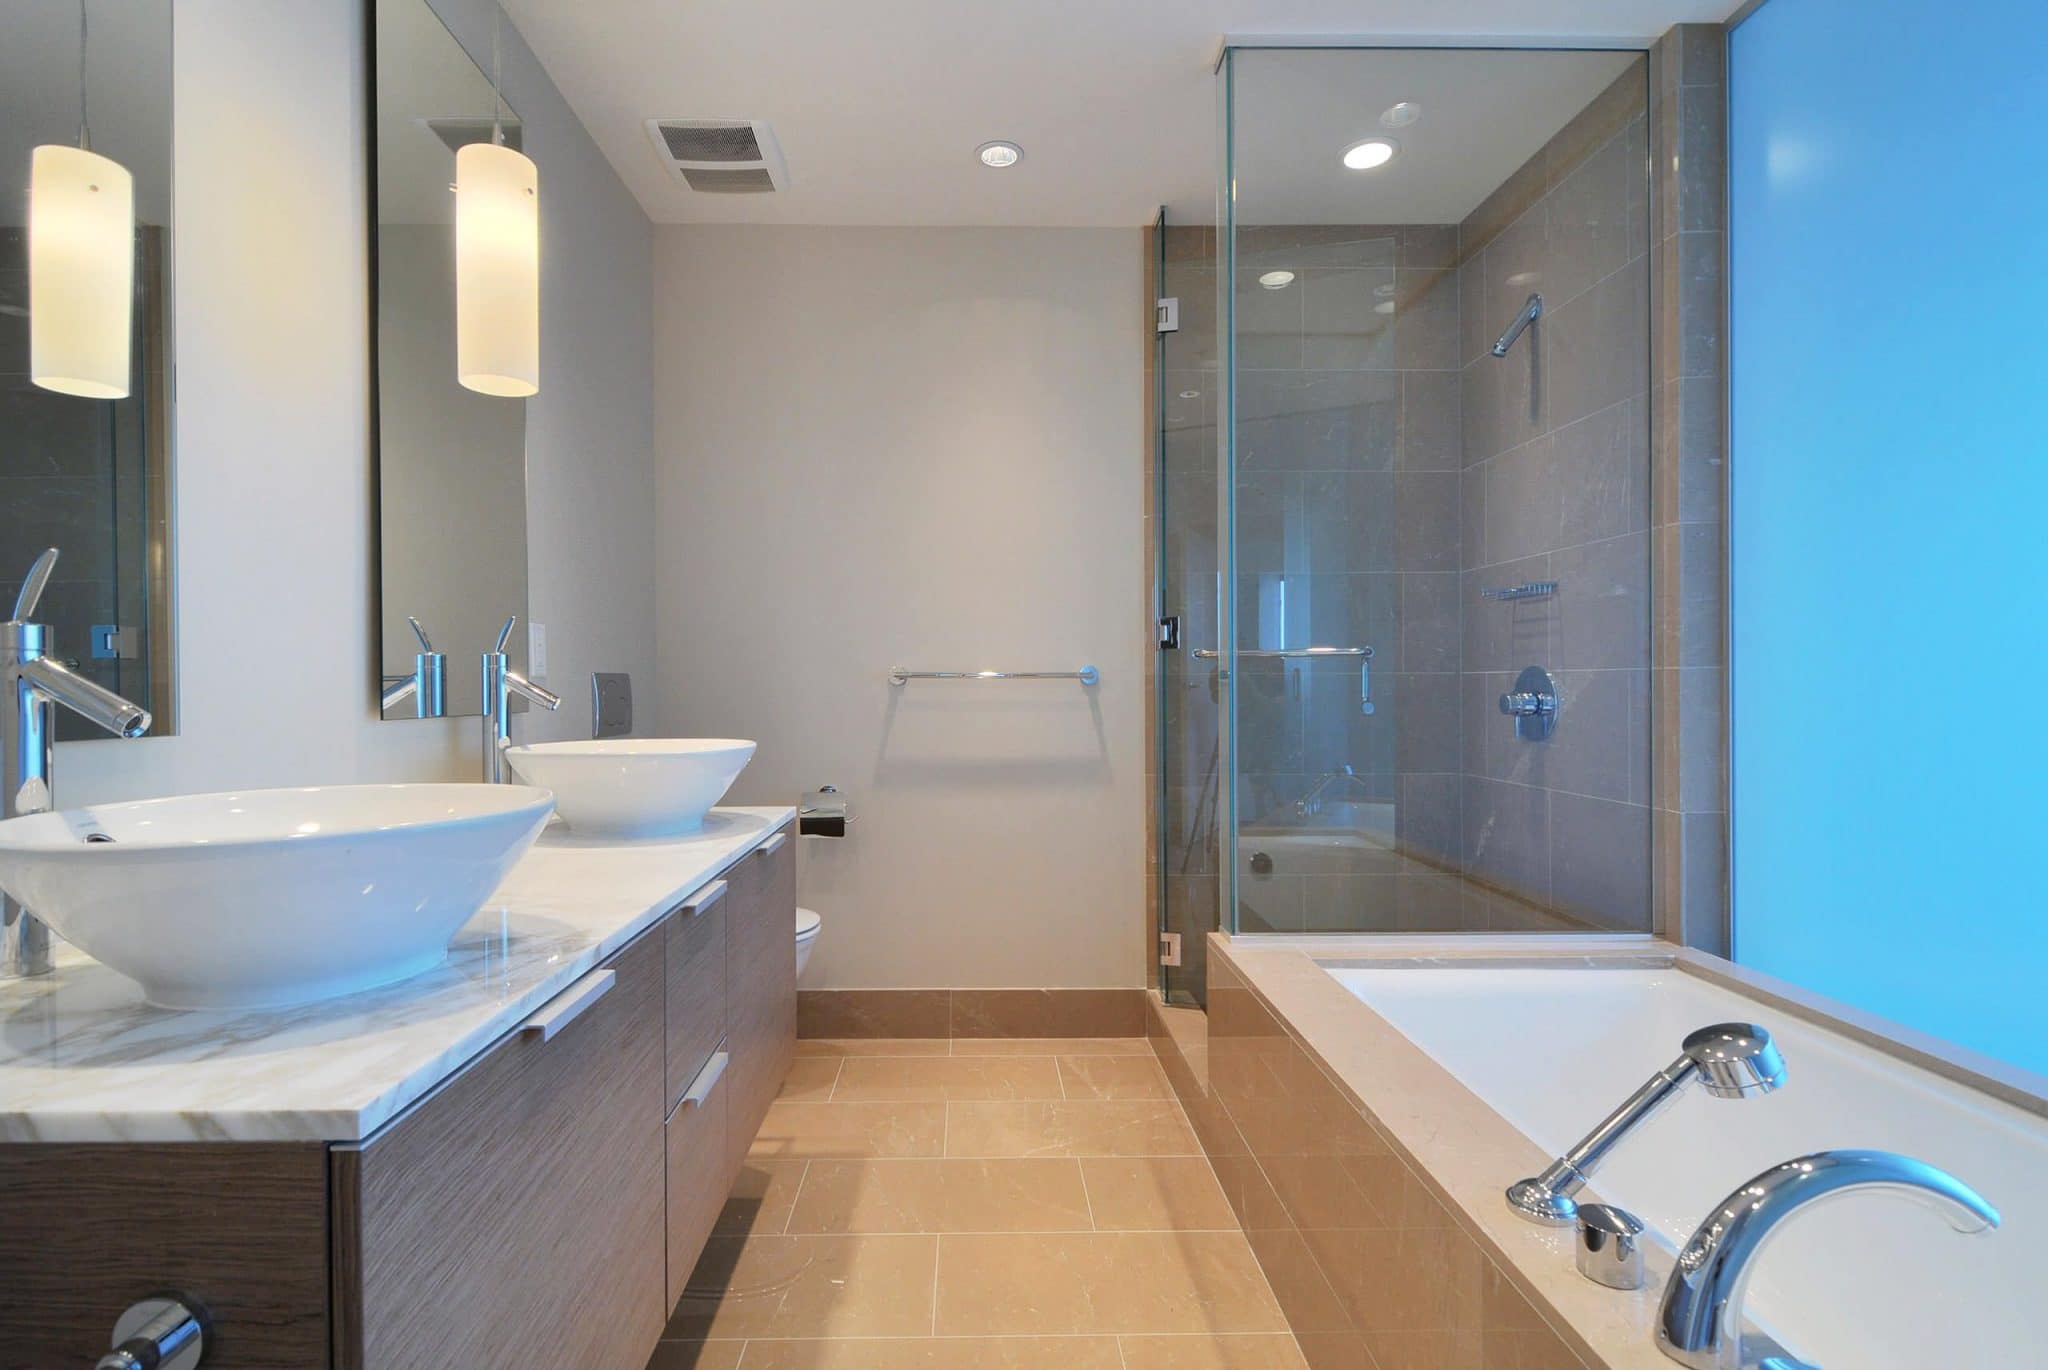 A Bathroom  s Layout  Best Online Cabinets